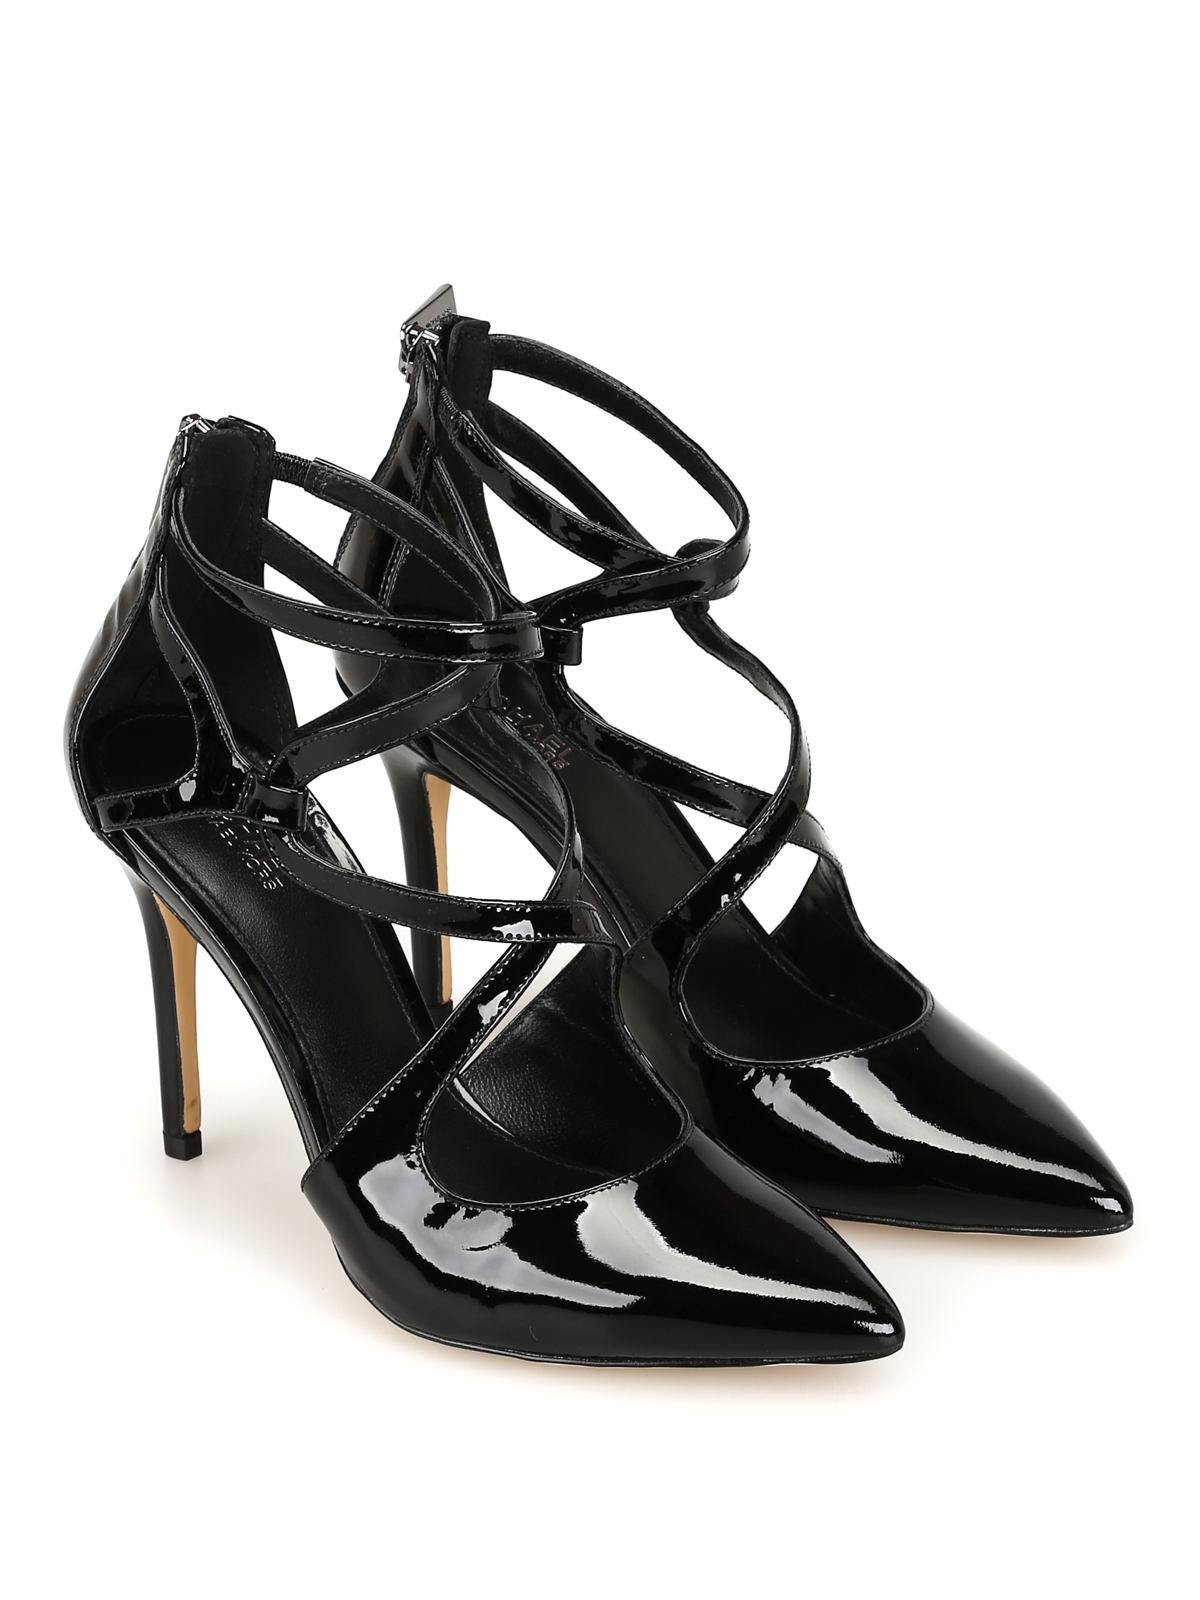 patent leather slingbacks - court shoes 